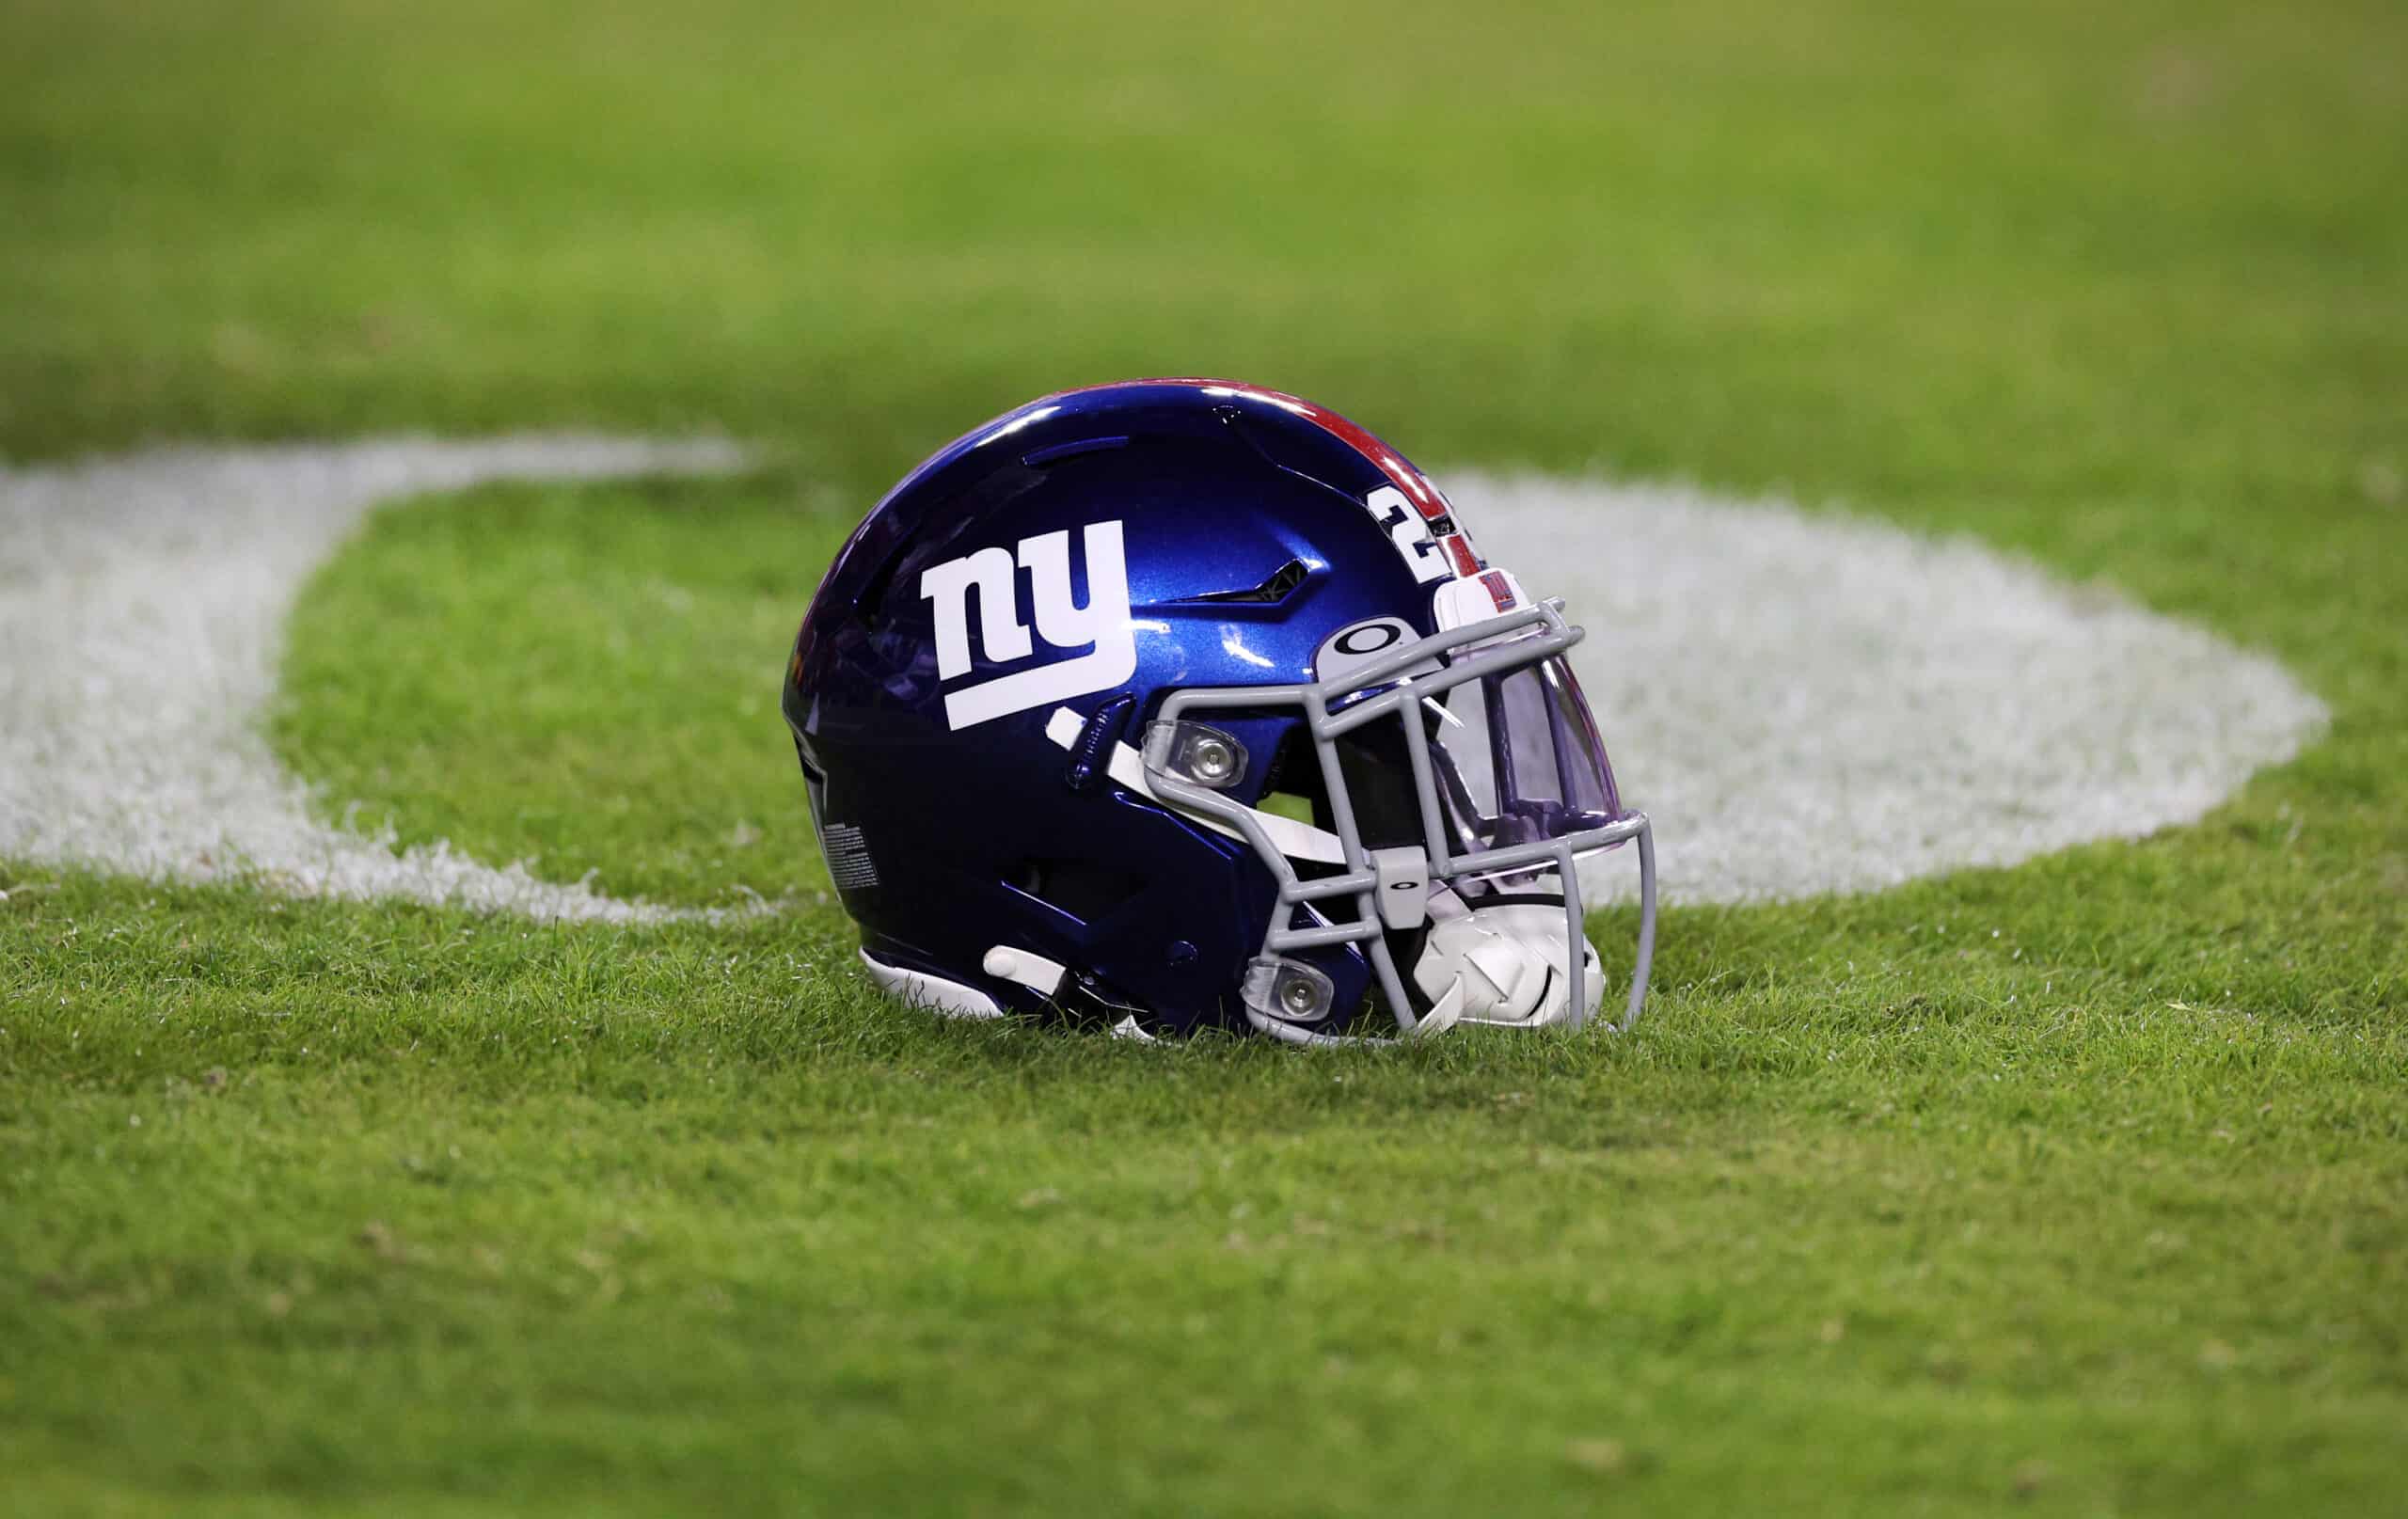 Giants TE Is Reportedly ‘Contemplating’ Retirement